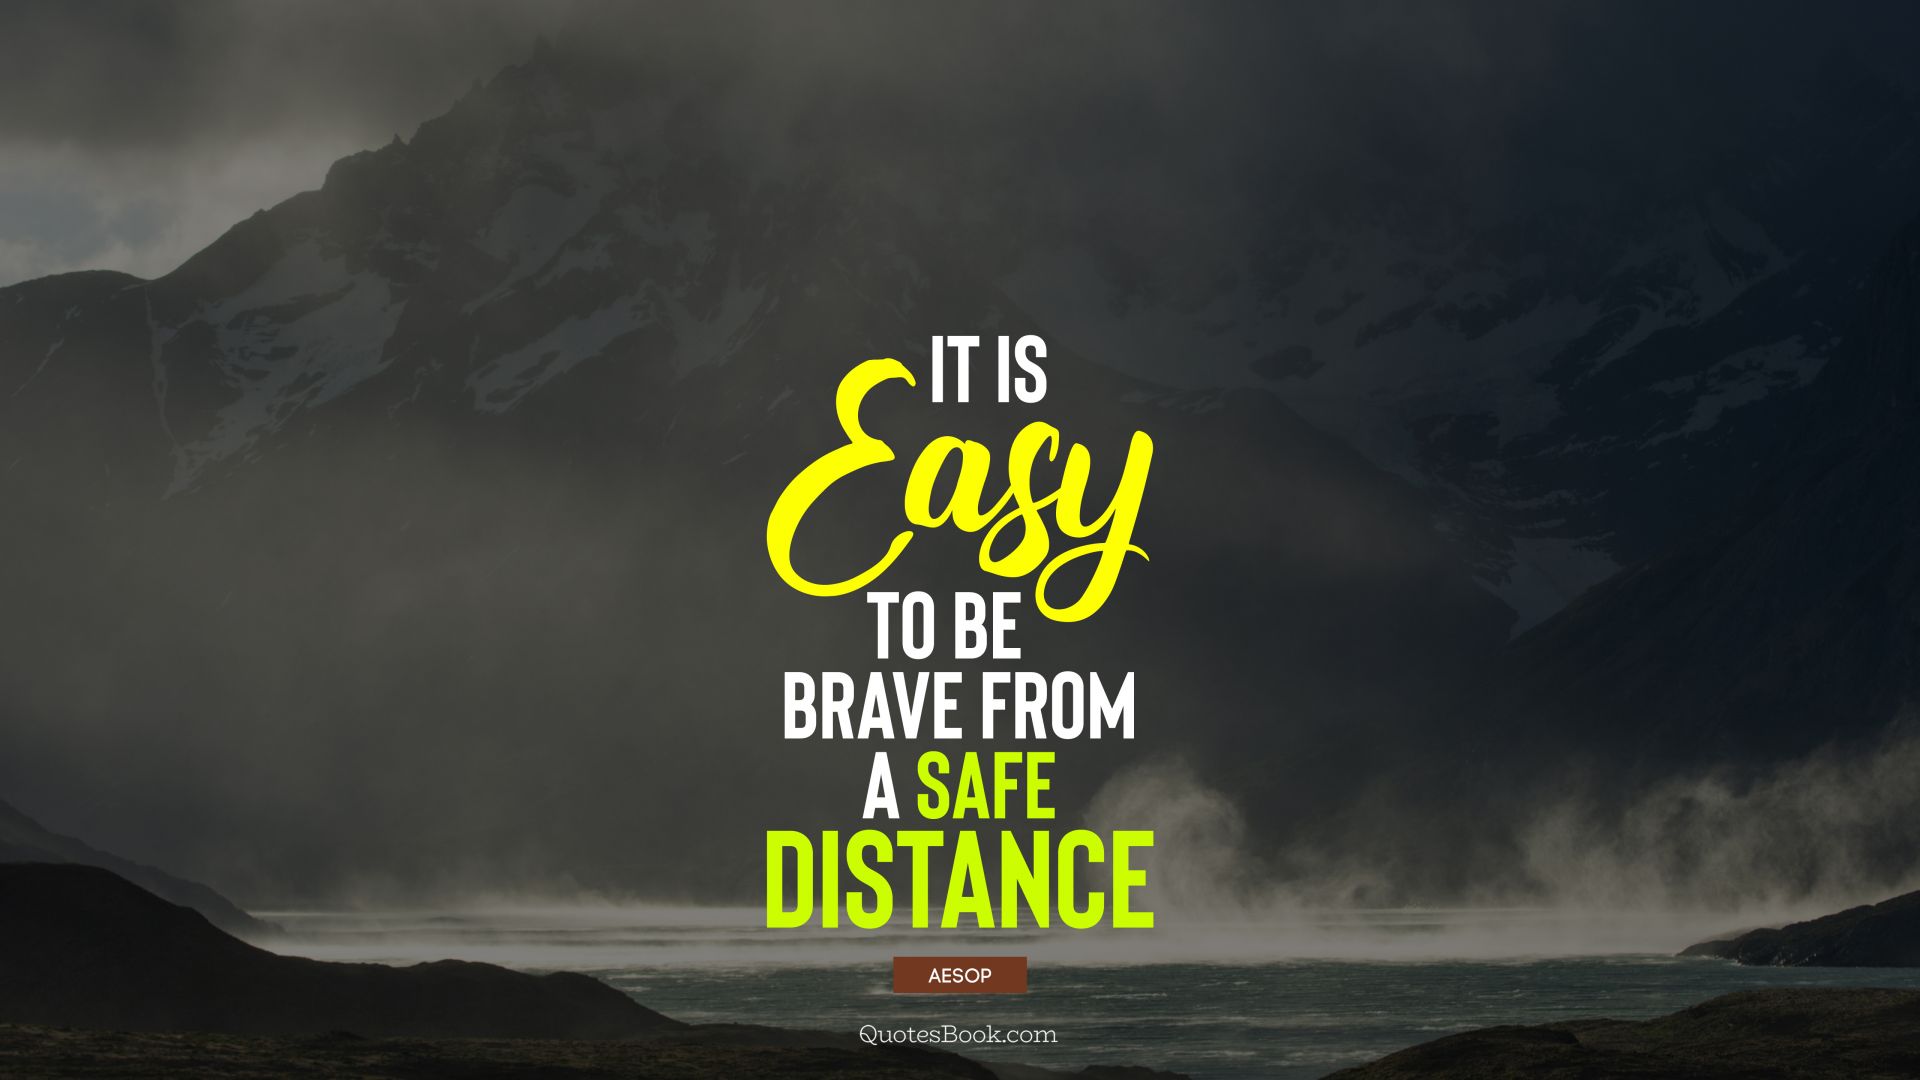 It is easy to be brave from a safe distance. - Quote by Aesop